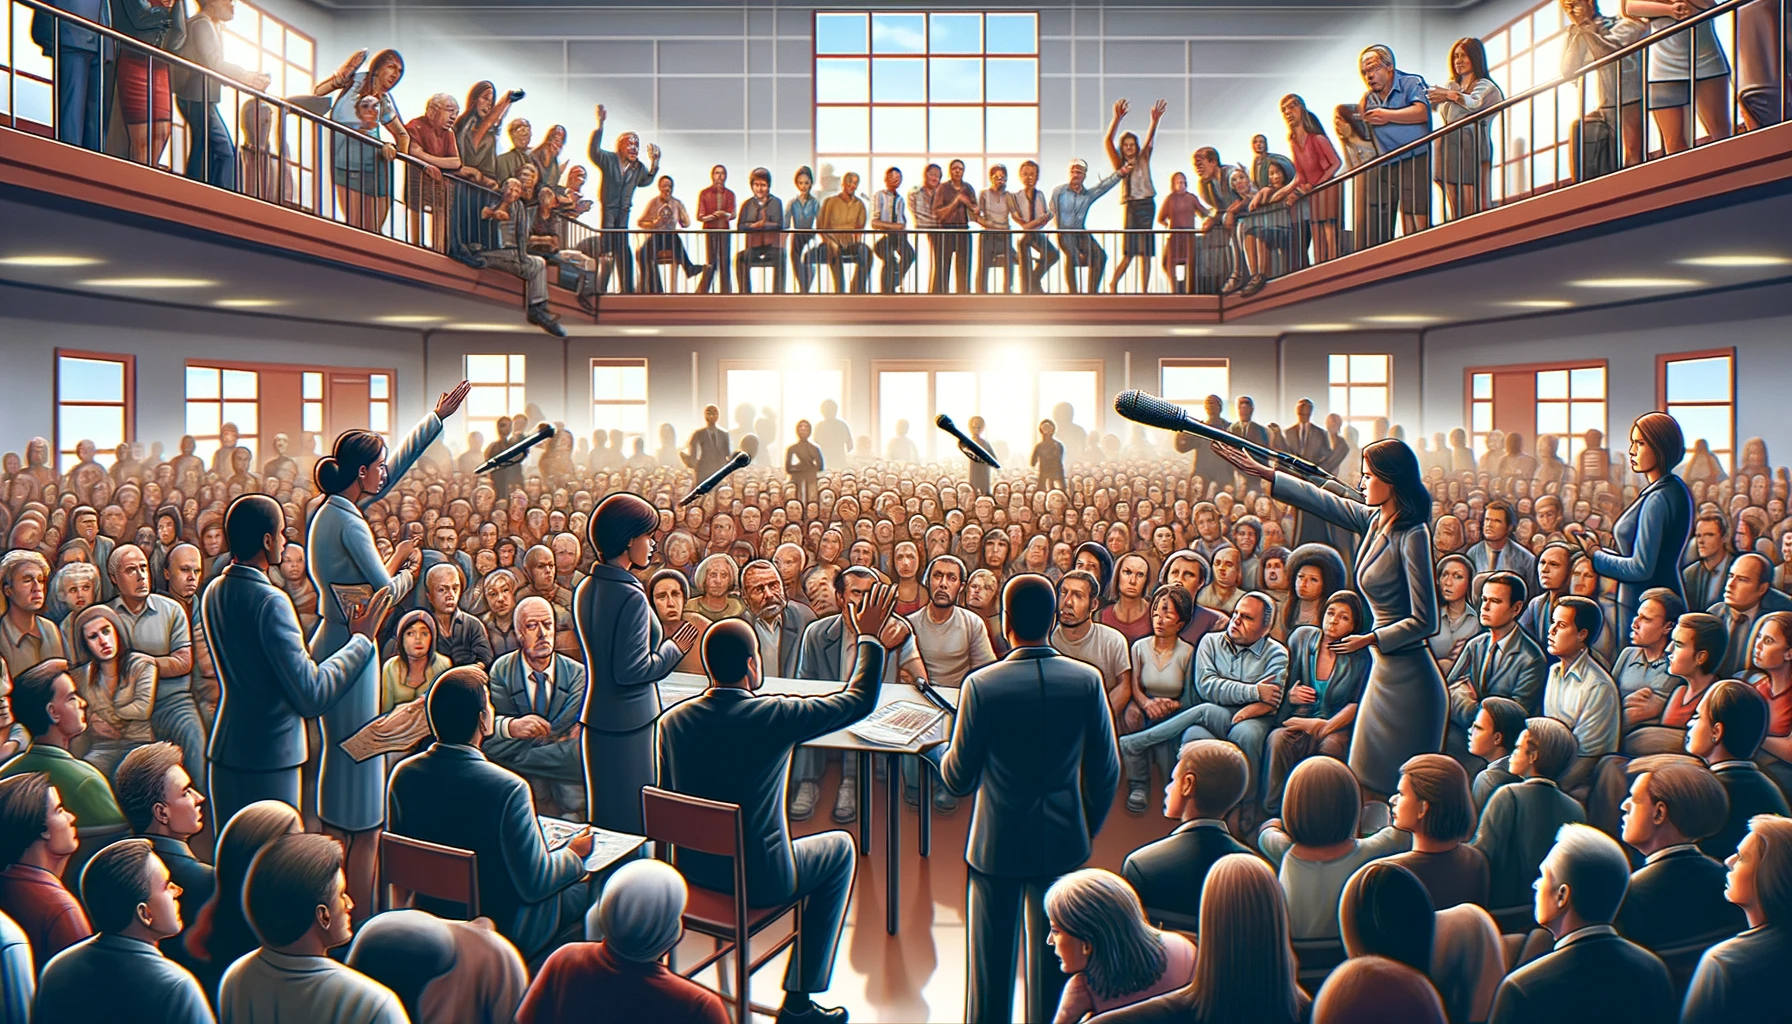 An illustration of a town hall meeting packed with people. In the foreground, a diverse group of professionals, some standing and others seated, are actively addressing the audience. They're focused on a central male figure at a lectern, who appears to be leading the discussion. The crowd, composed of a wide demographic, watches intently; some stand on balconies above. The room has a classic feel with wooden floors, brick walls, and large windows letting in light. The atmosphere is serious, capturing a moment of public engagement and discourse.